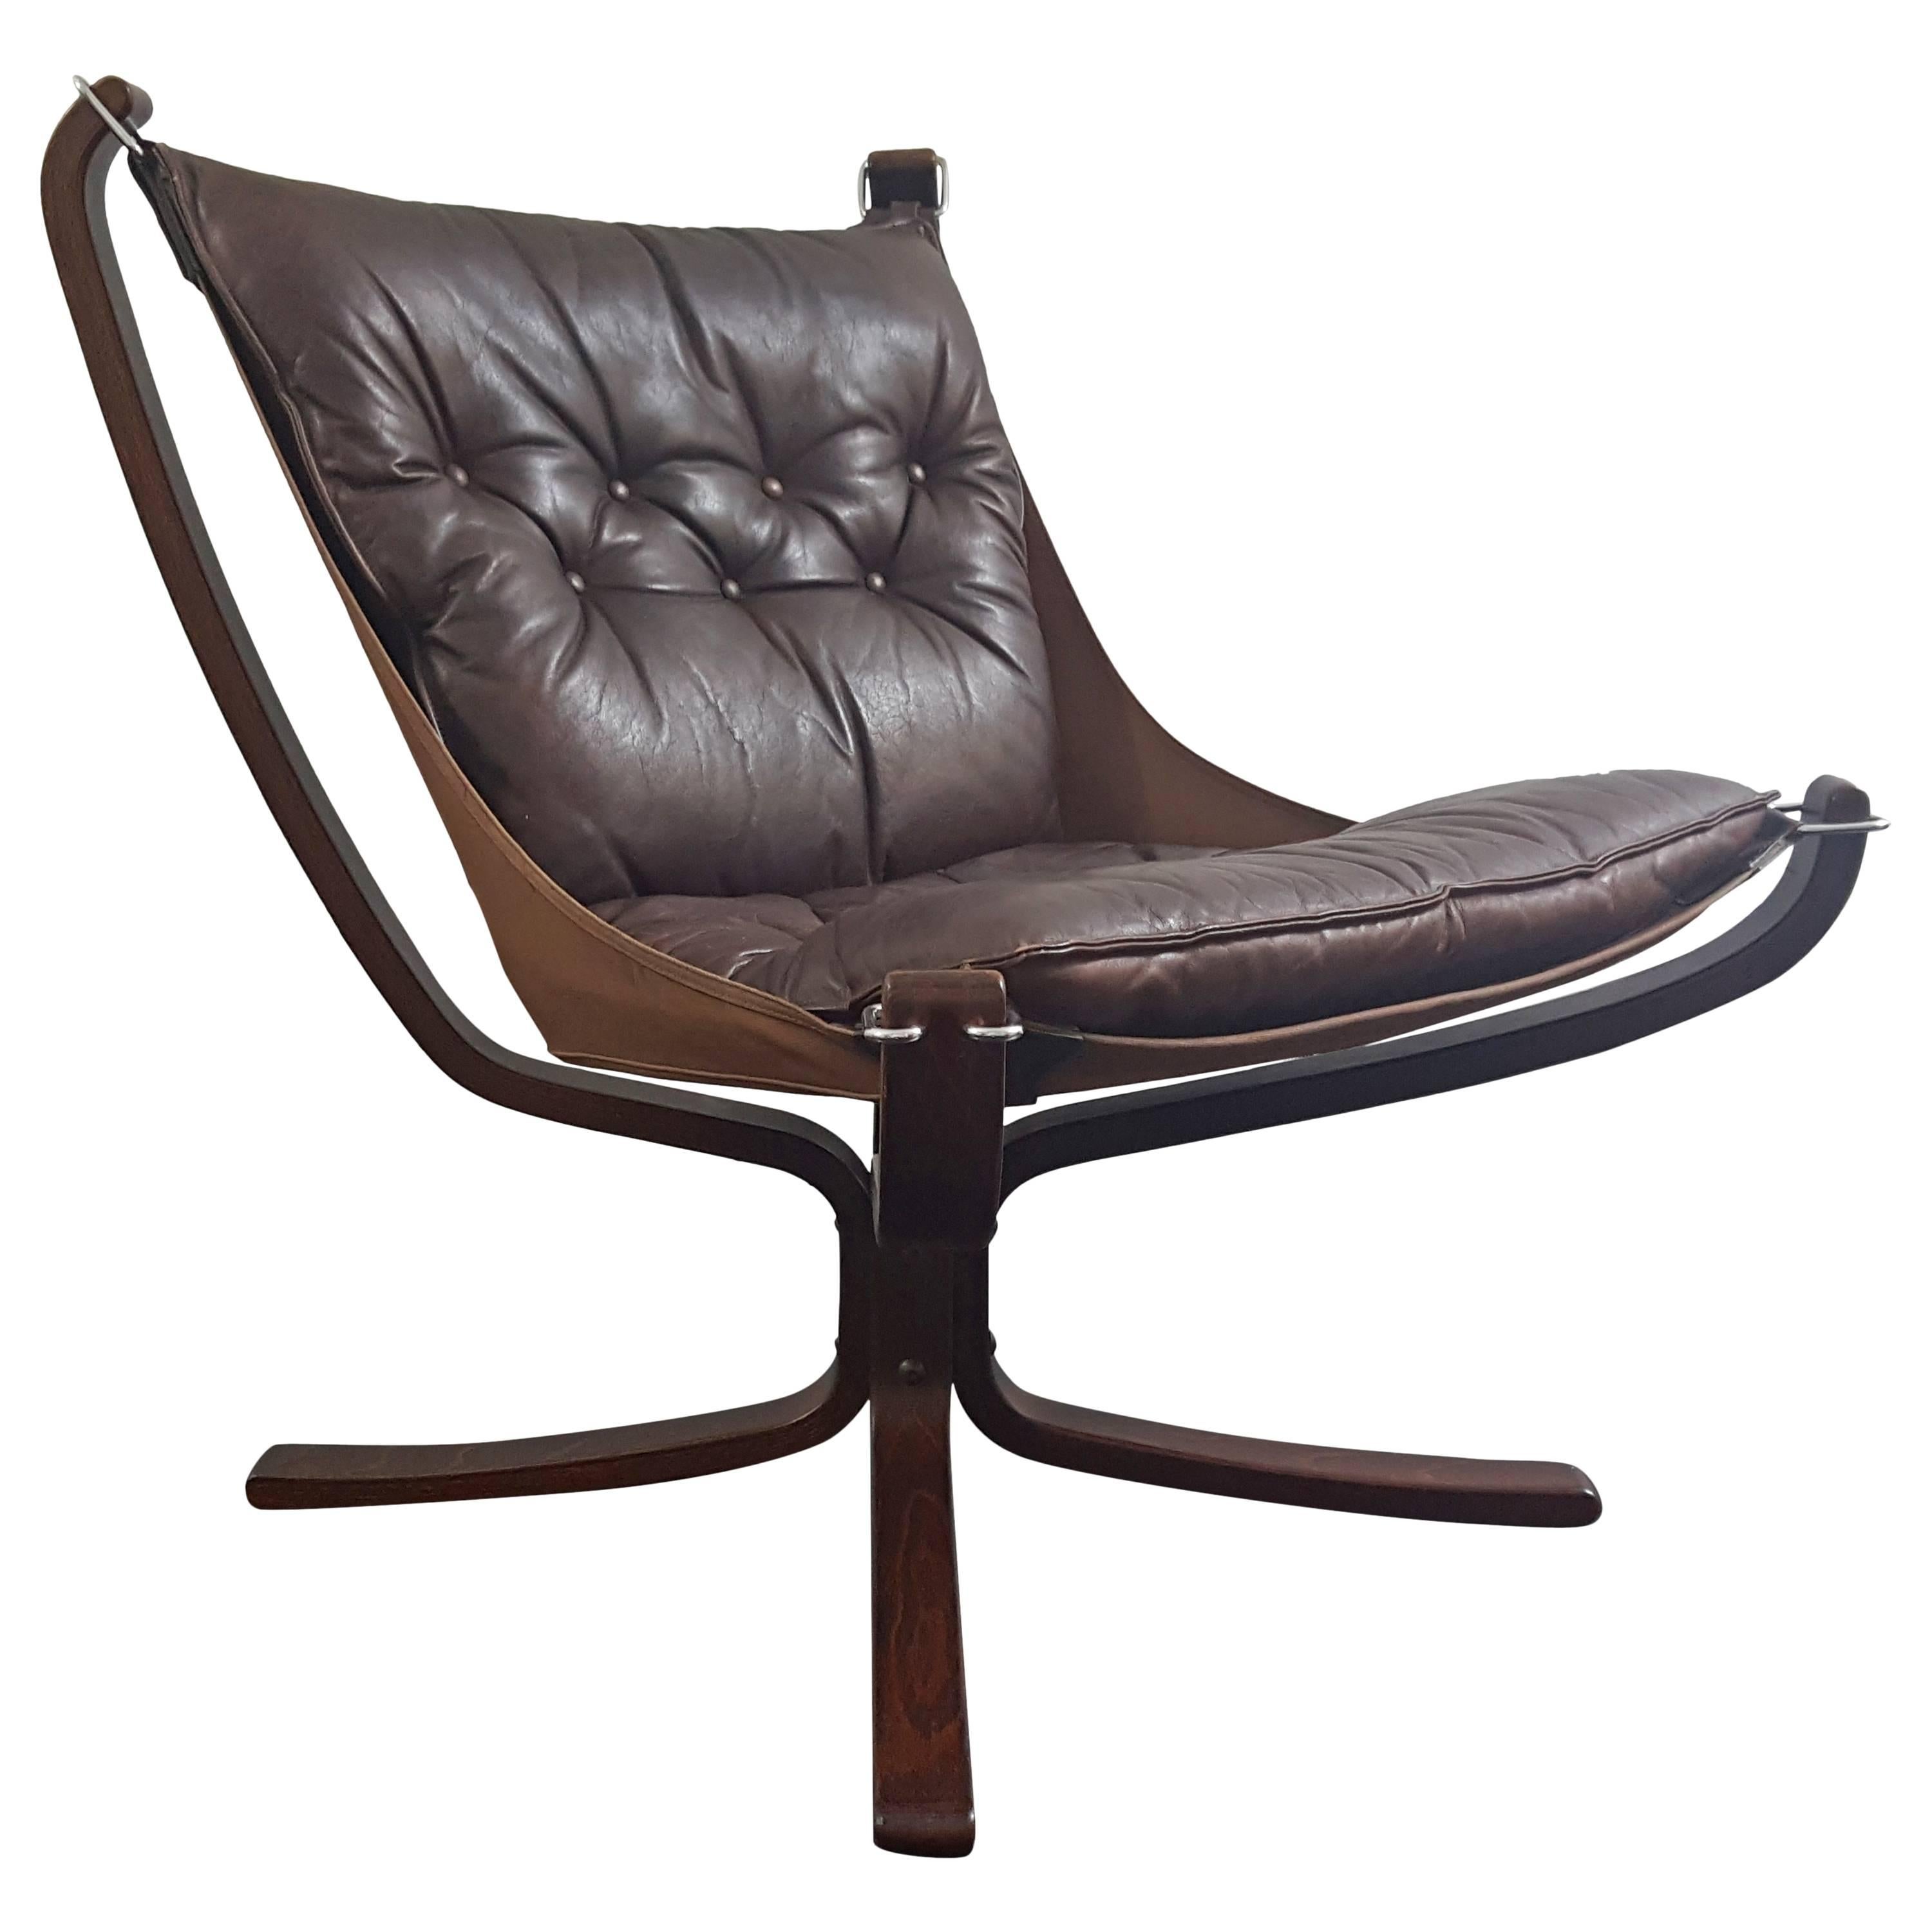 Vintage Low-Backed X-Framed Falcon Chair by Sigurd Ressell for Vatne Mobler